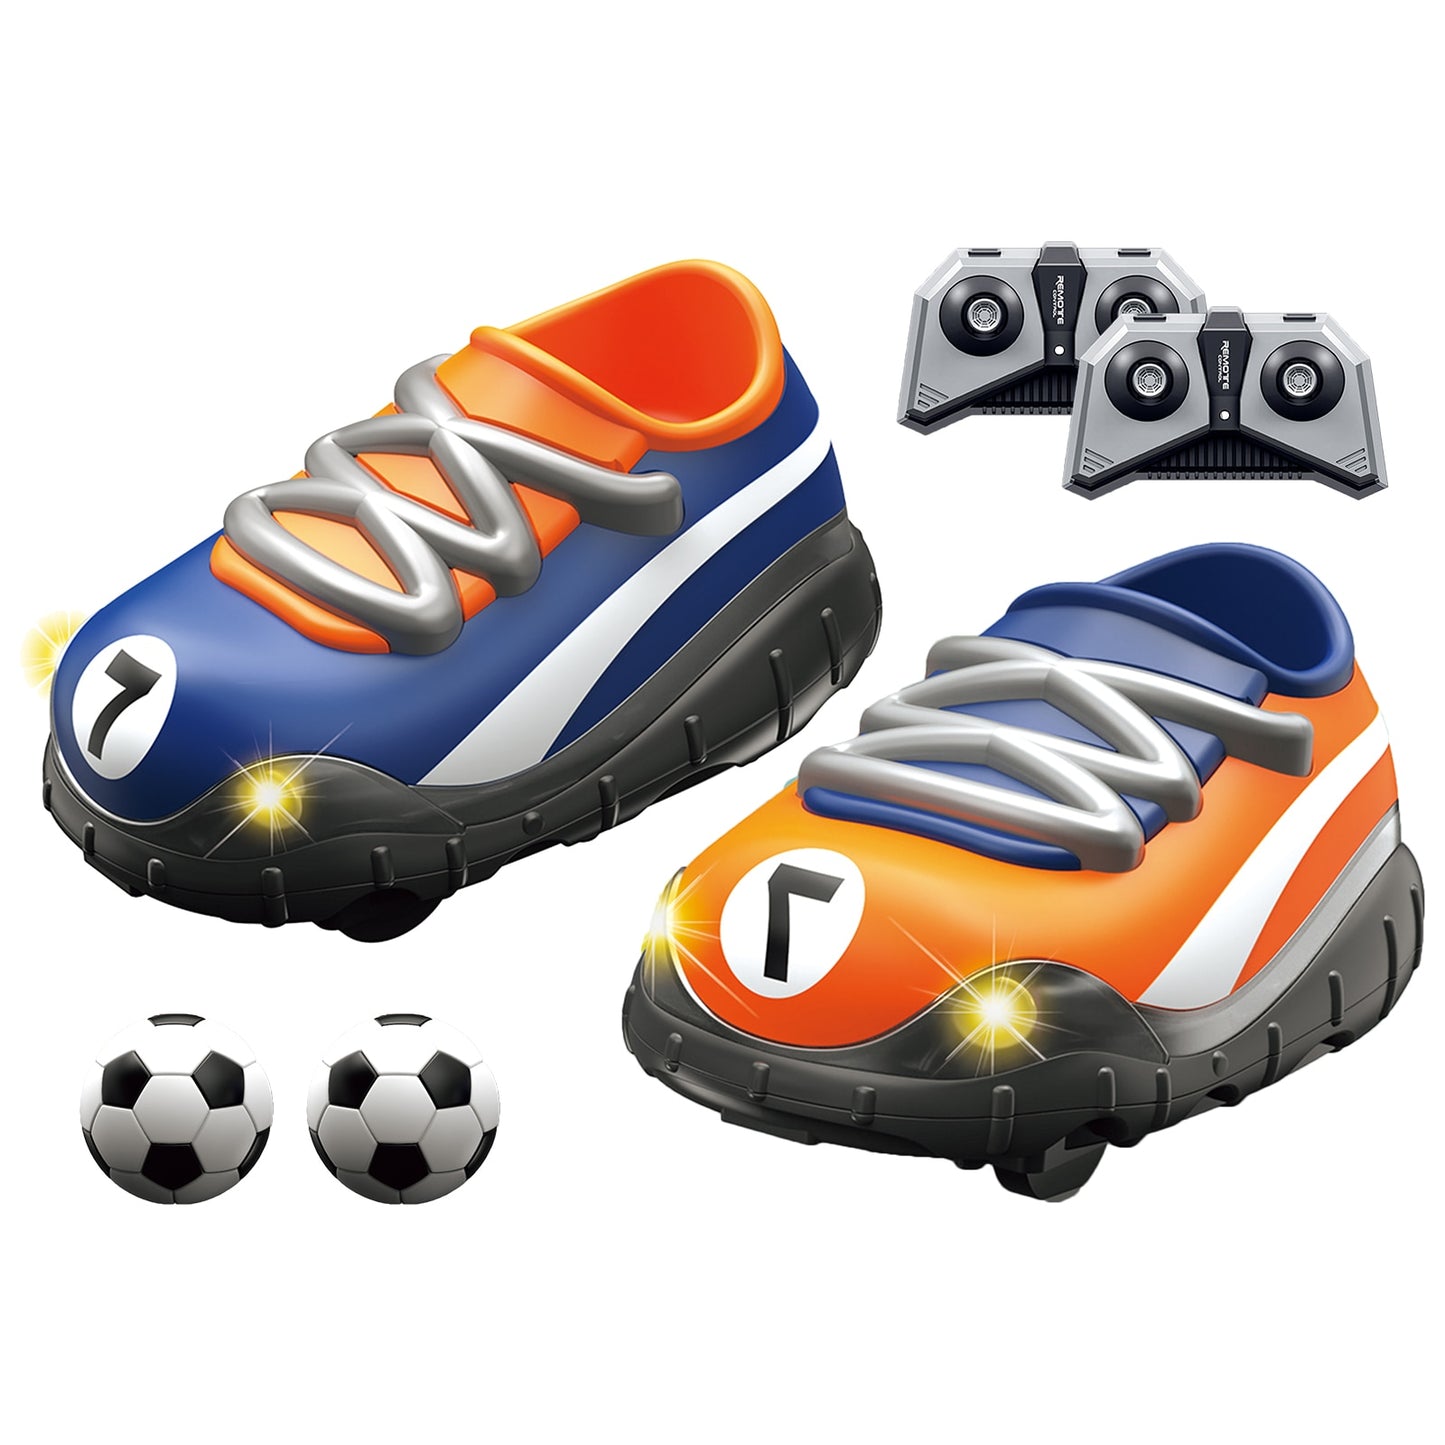 Remote control shoe shaped soccer car